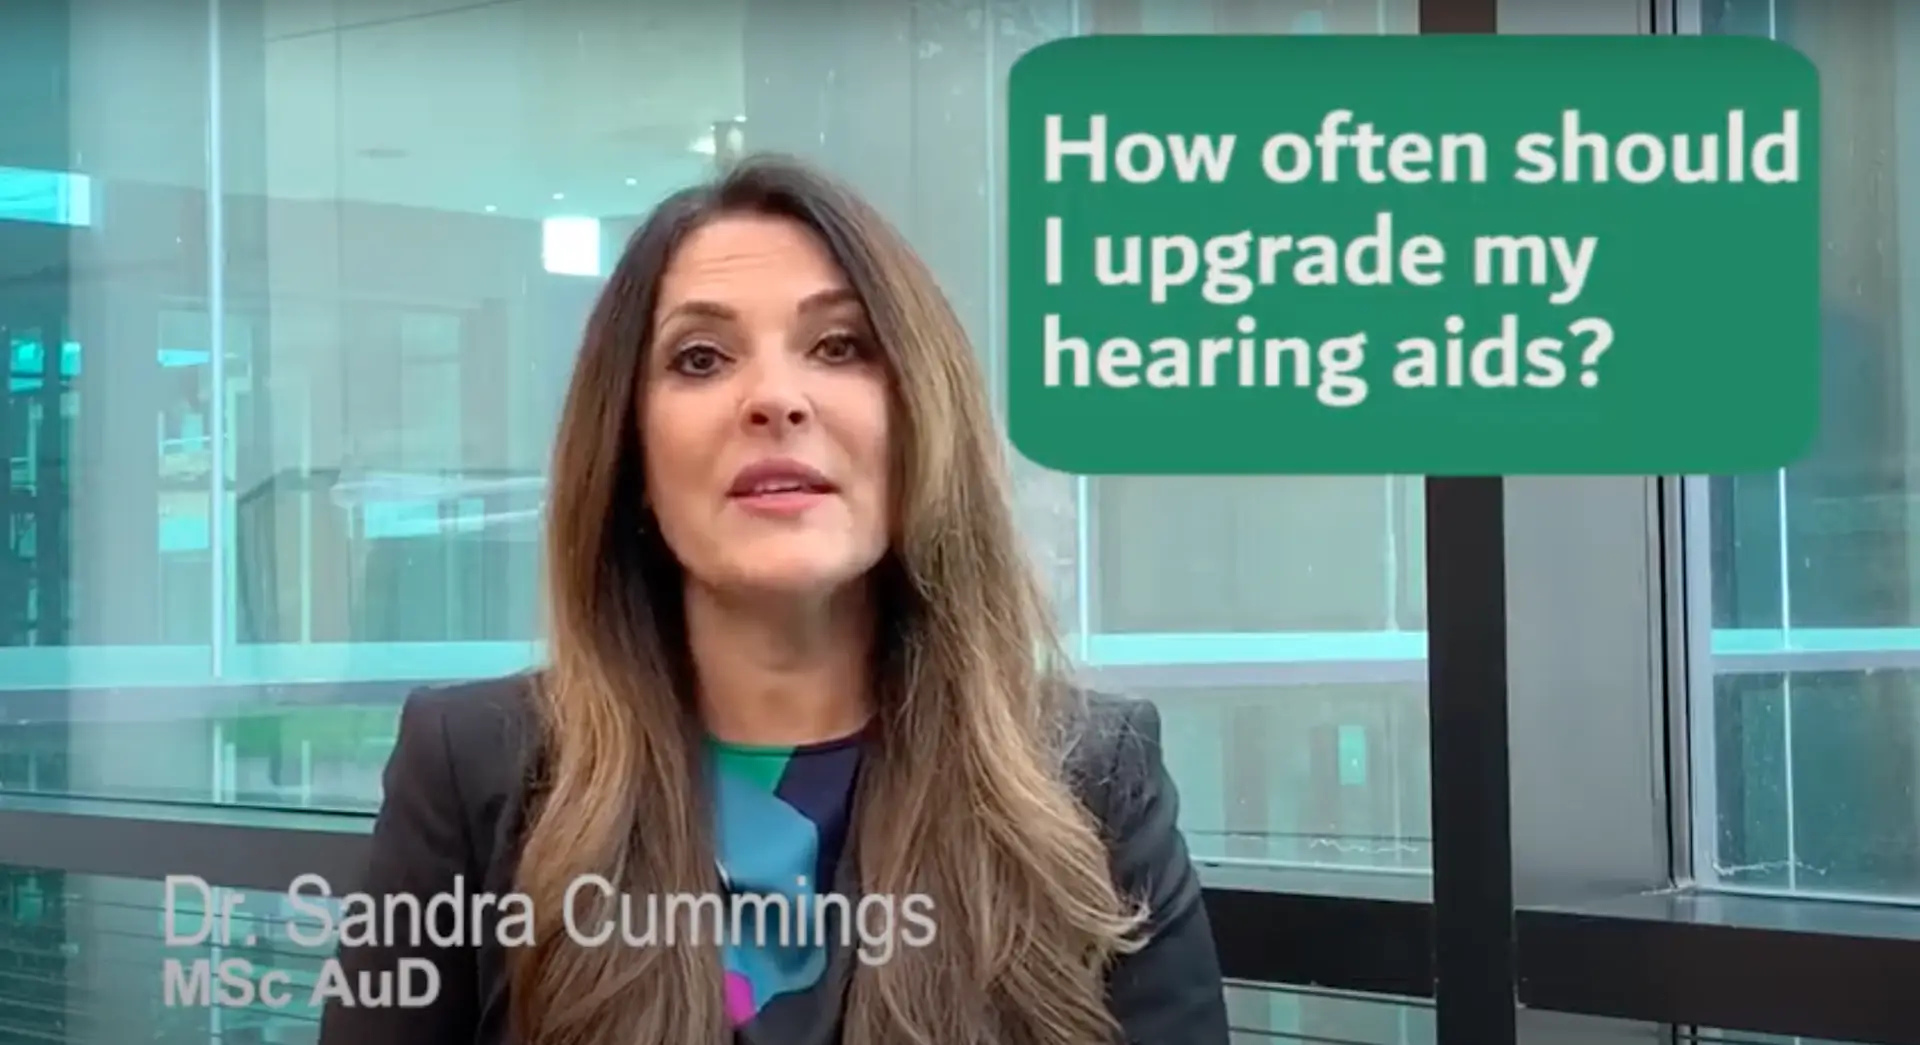 How often should I upgrade my hearing aids? Image